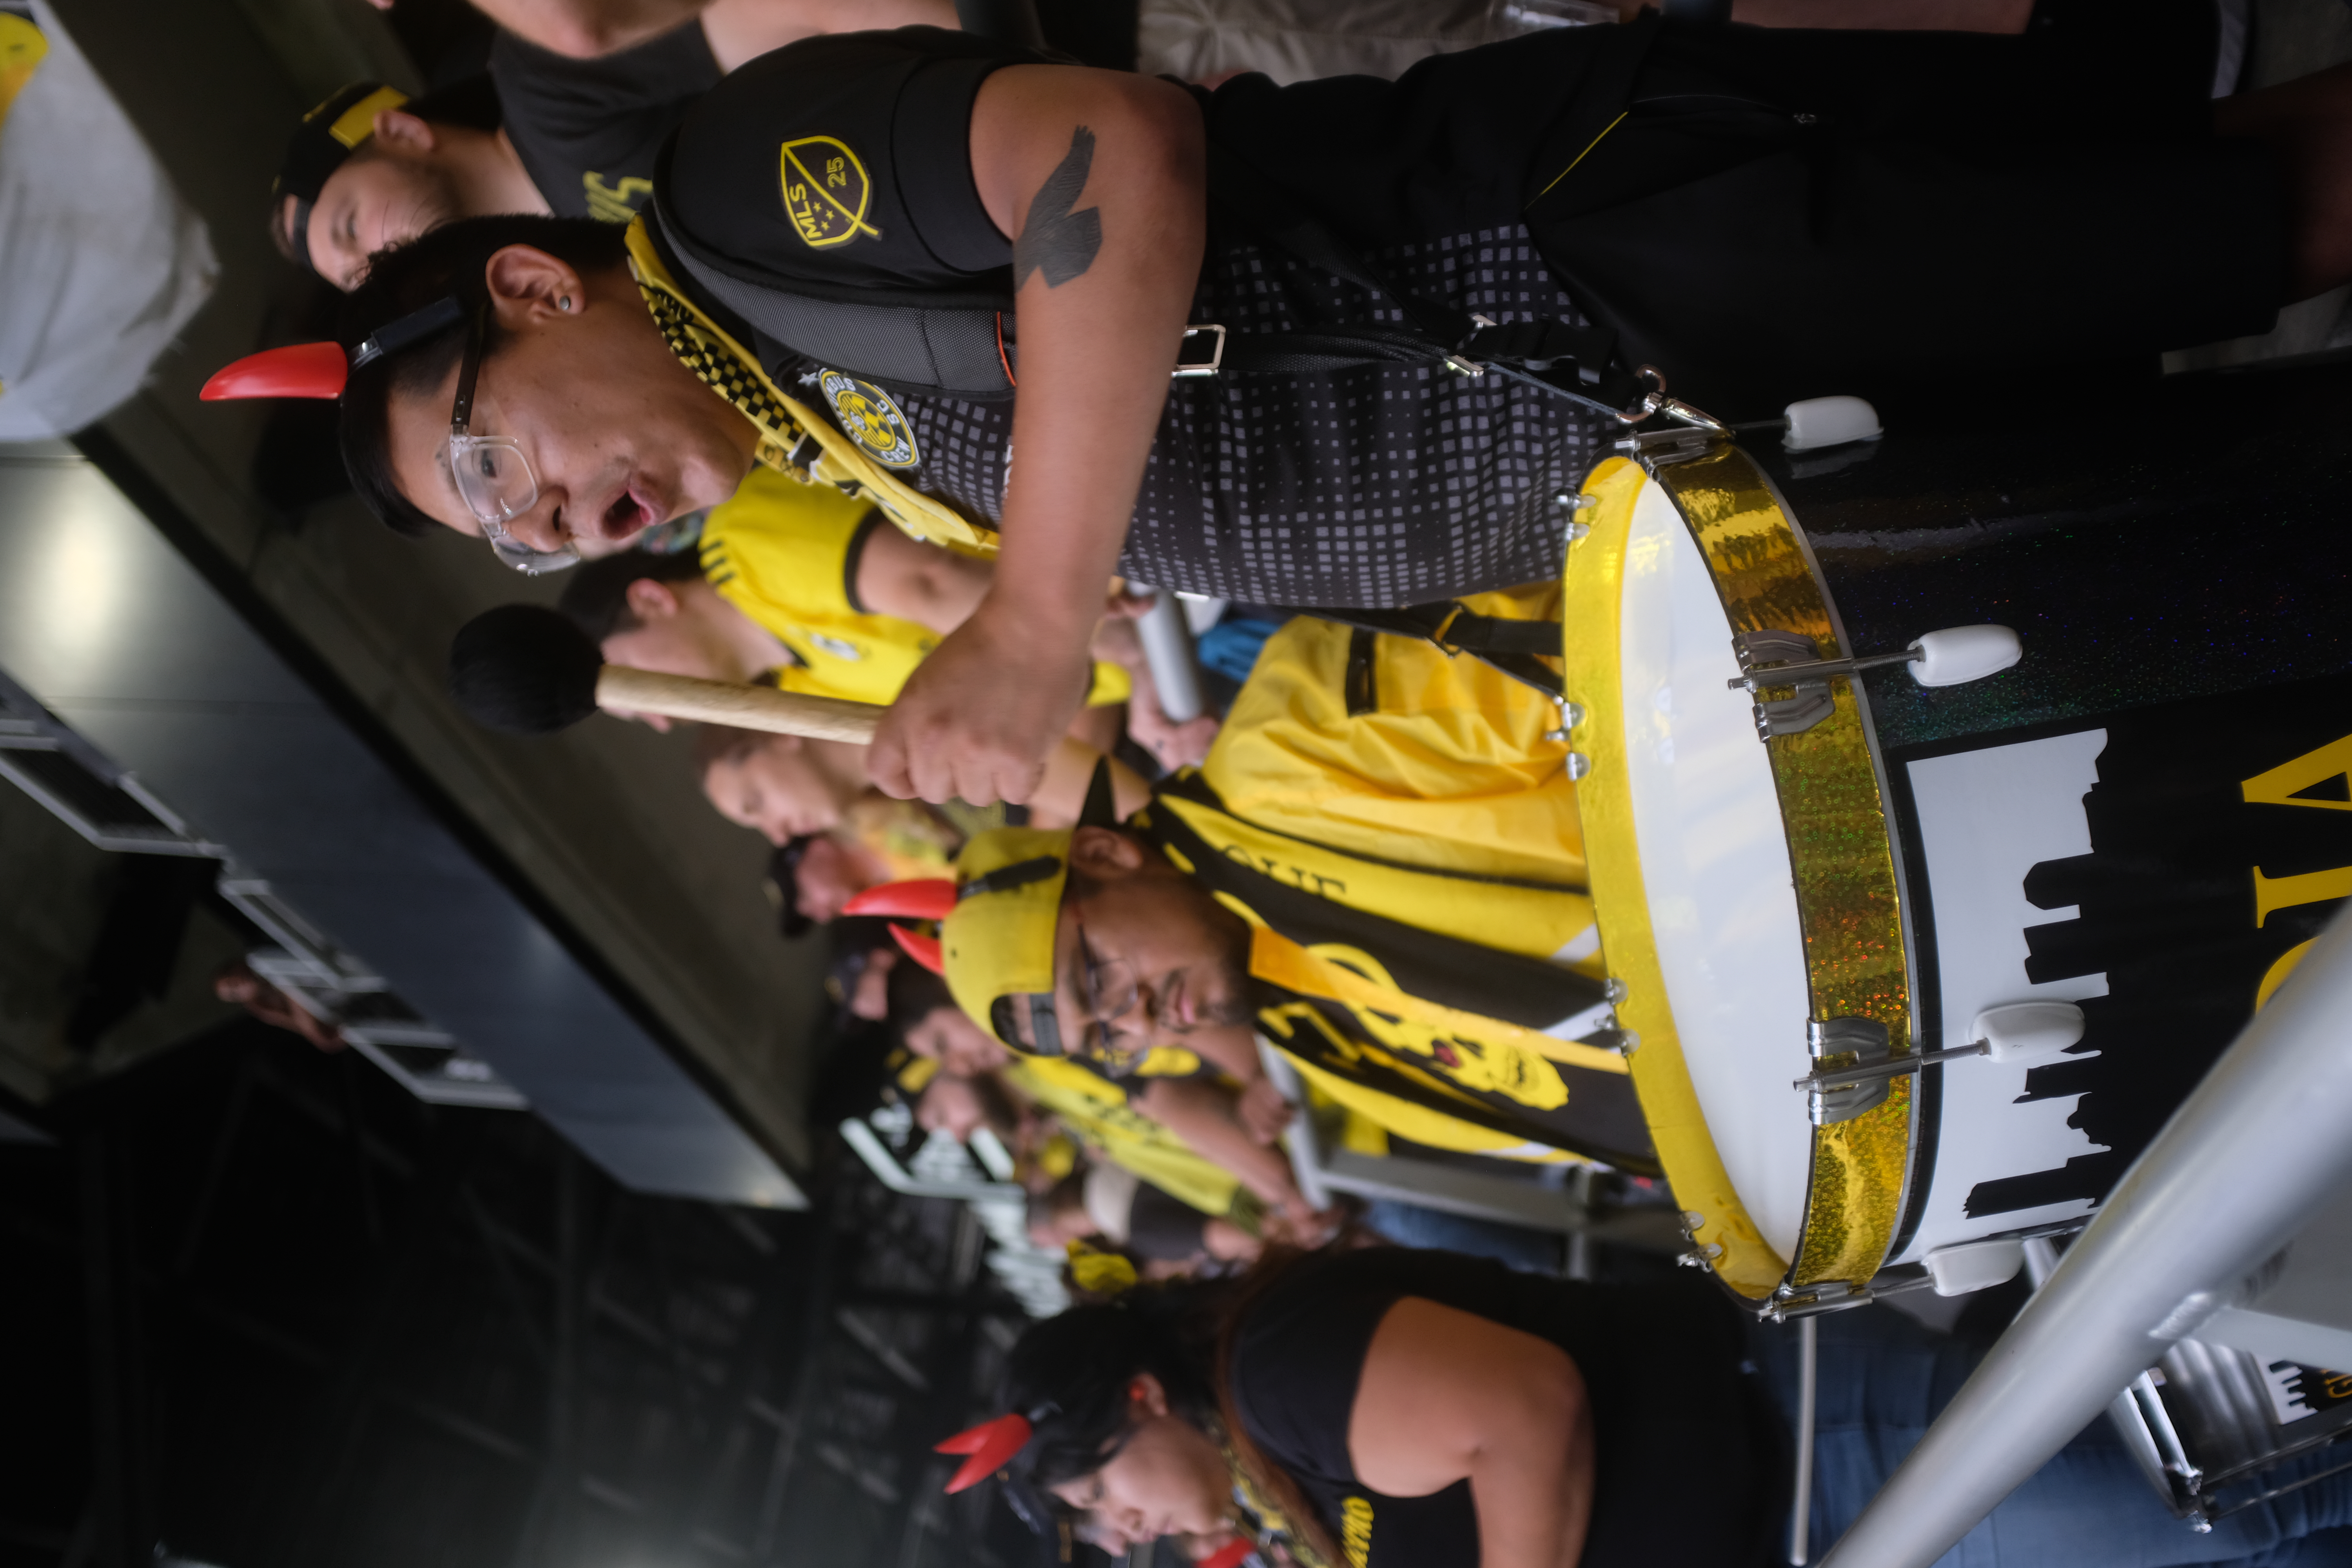 Members of The Nordecke bang drums at a Crew match,